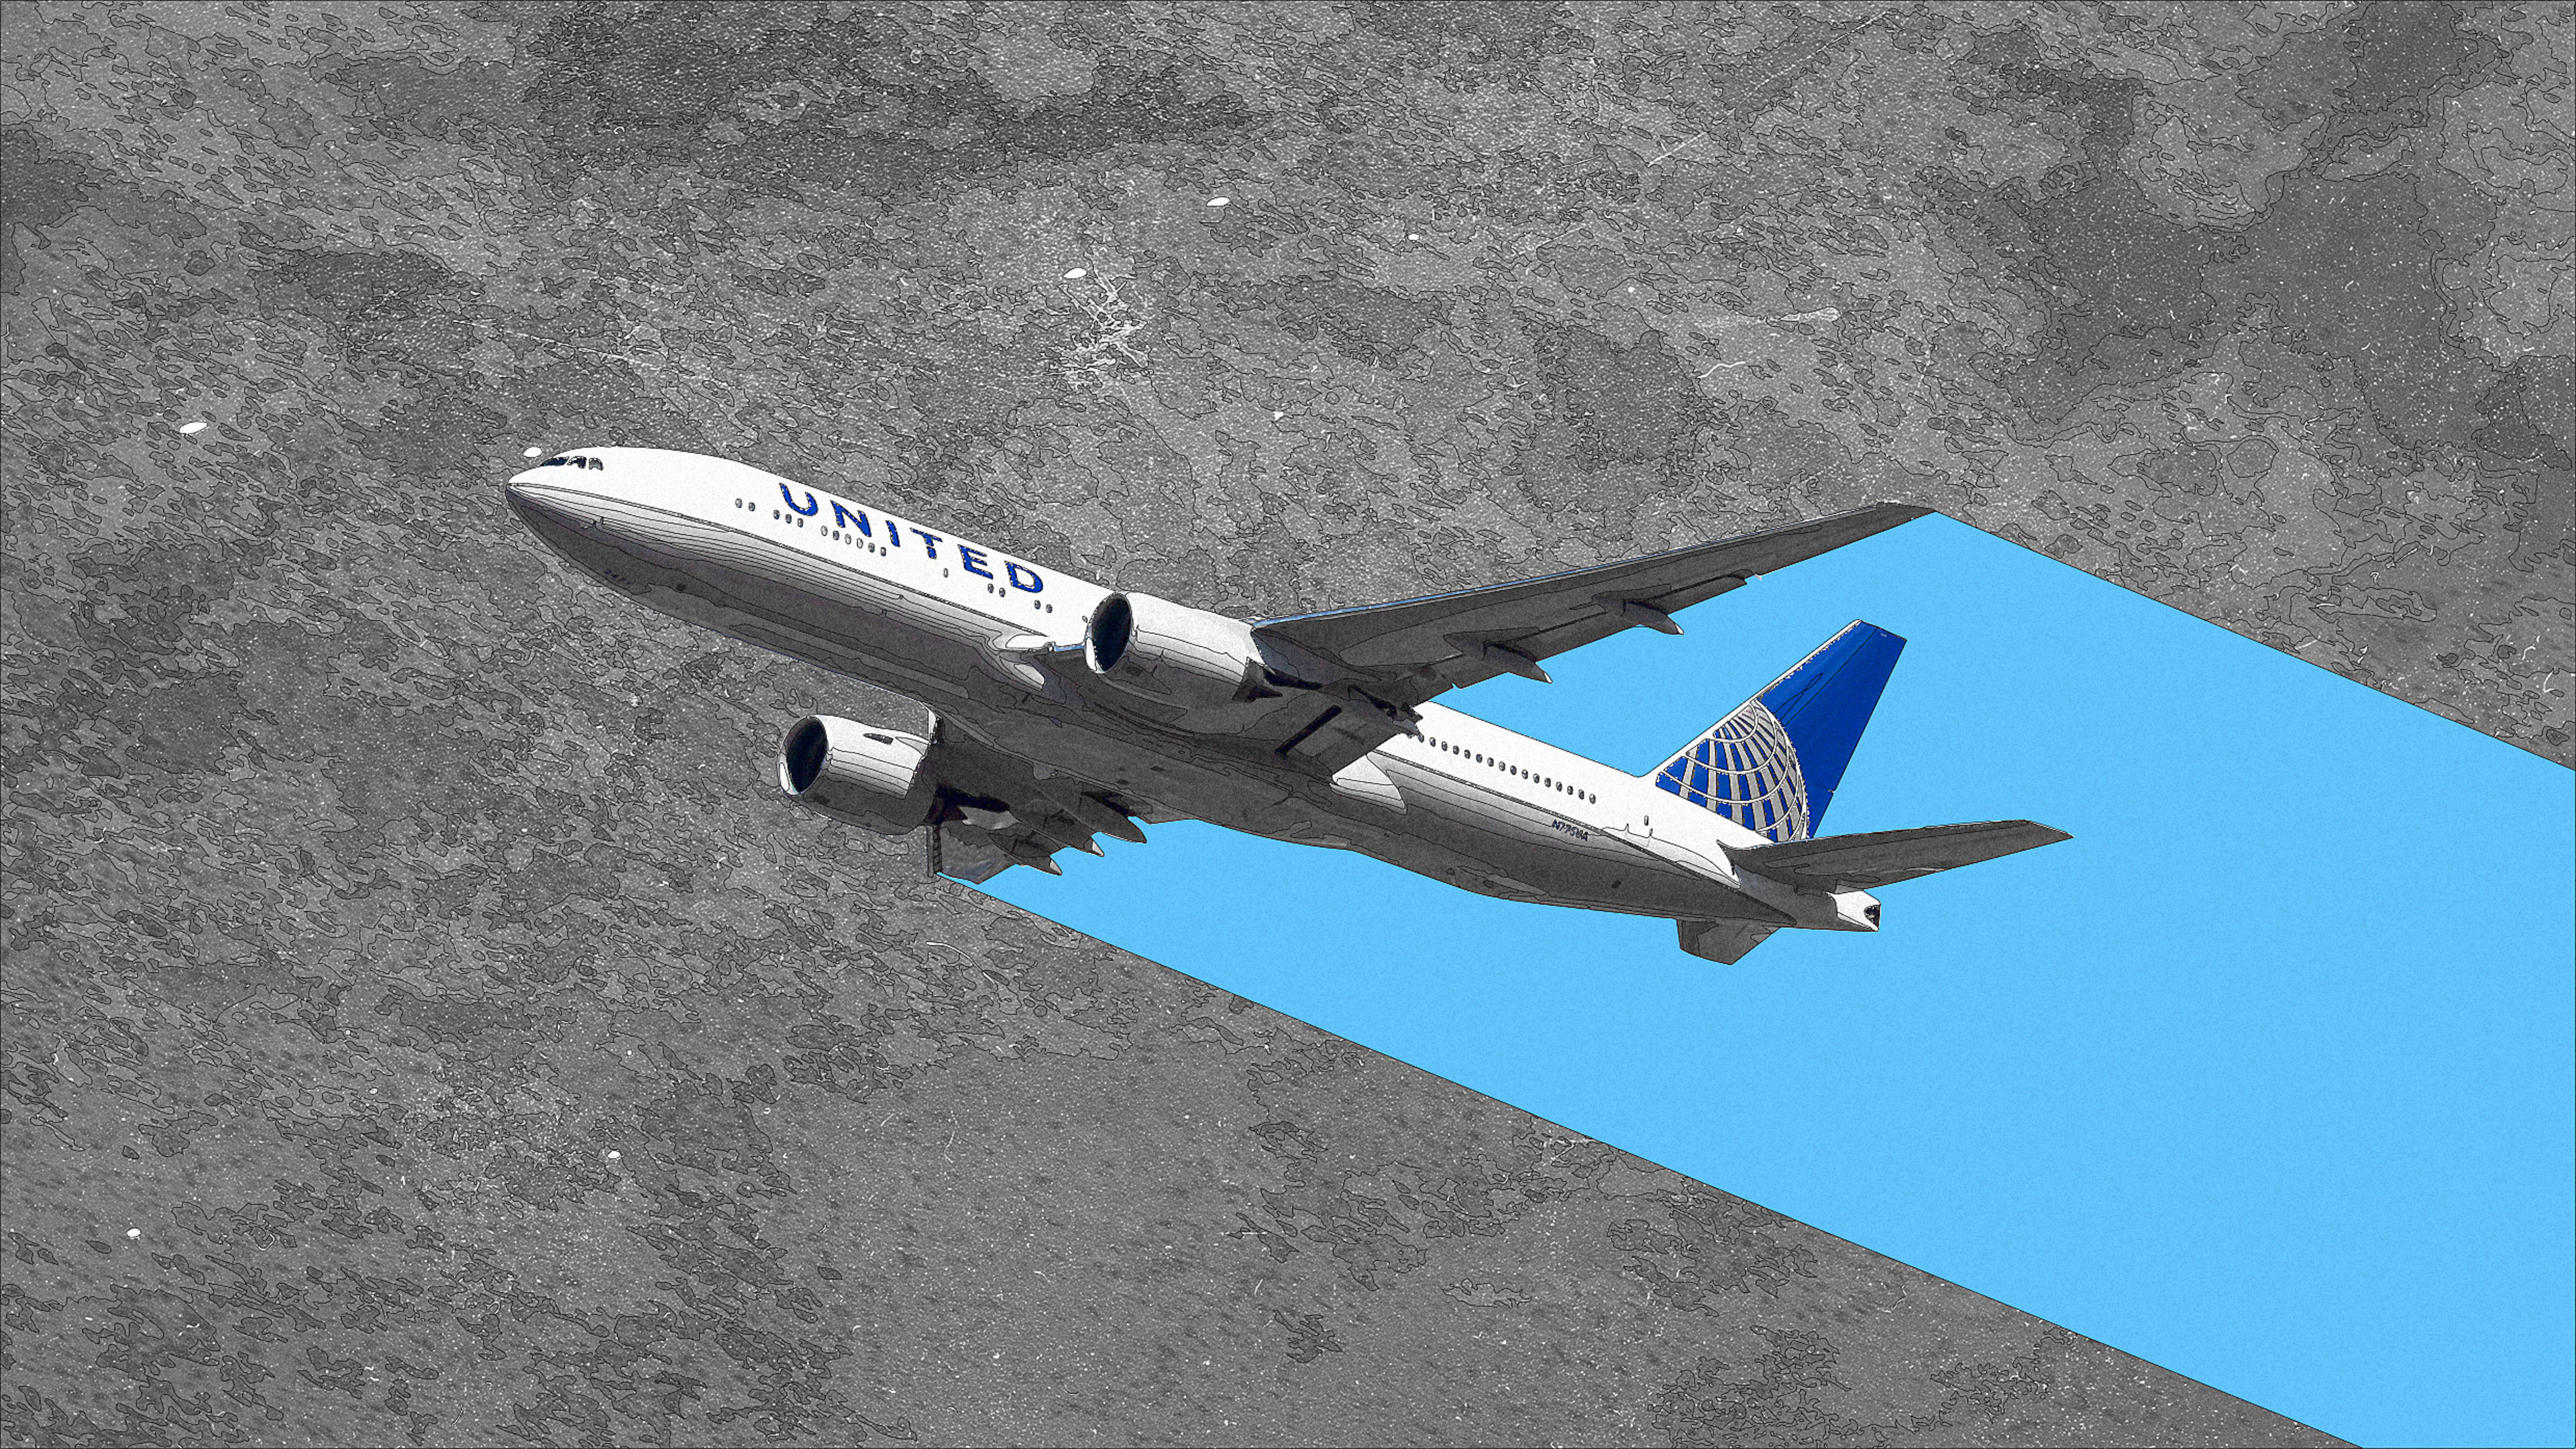 United Airlines is making major investments in carbon sequestration